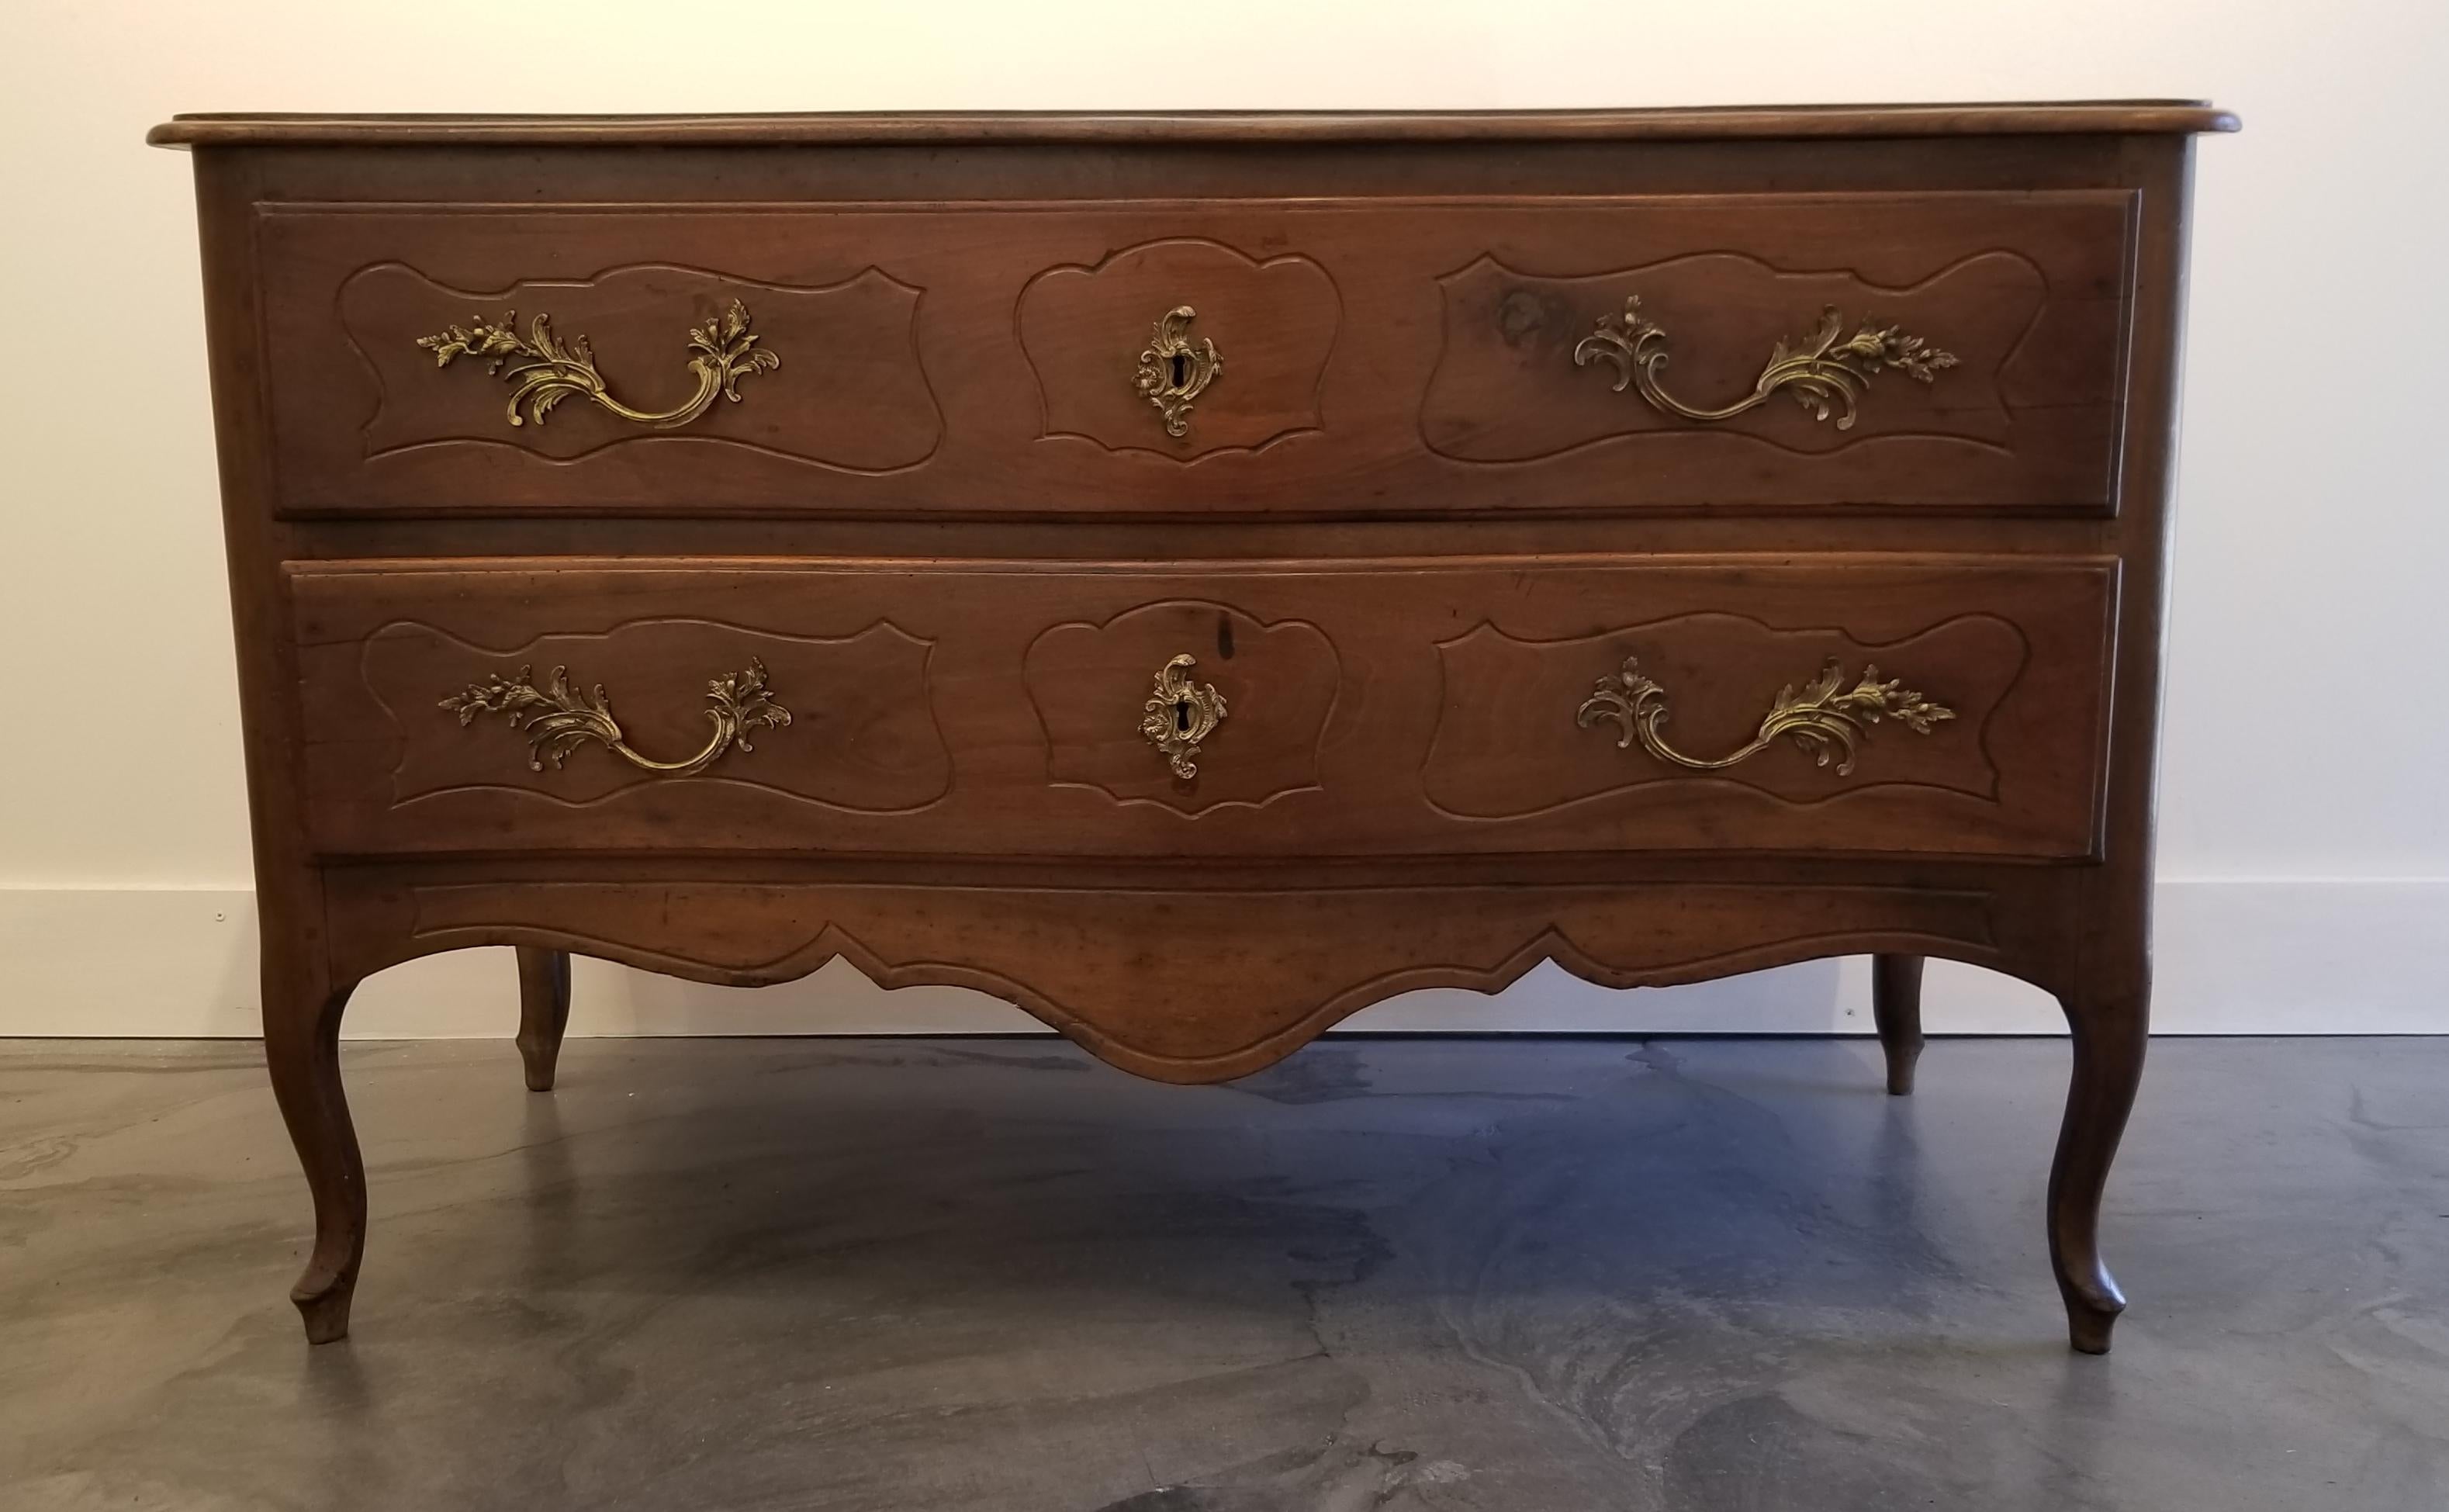 A mid-18th century Italian 2-drawer walnut commode with olive secondary woods. Retains original hardware, escutcheon plates and locks. Serpentine front on cabriole legs with hoof feet, circa 1760.